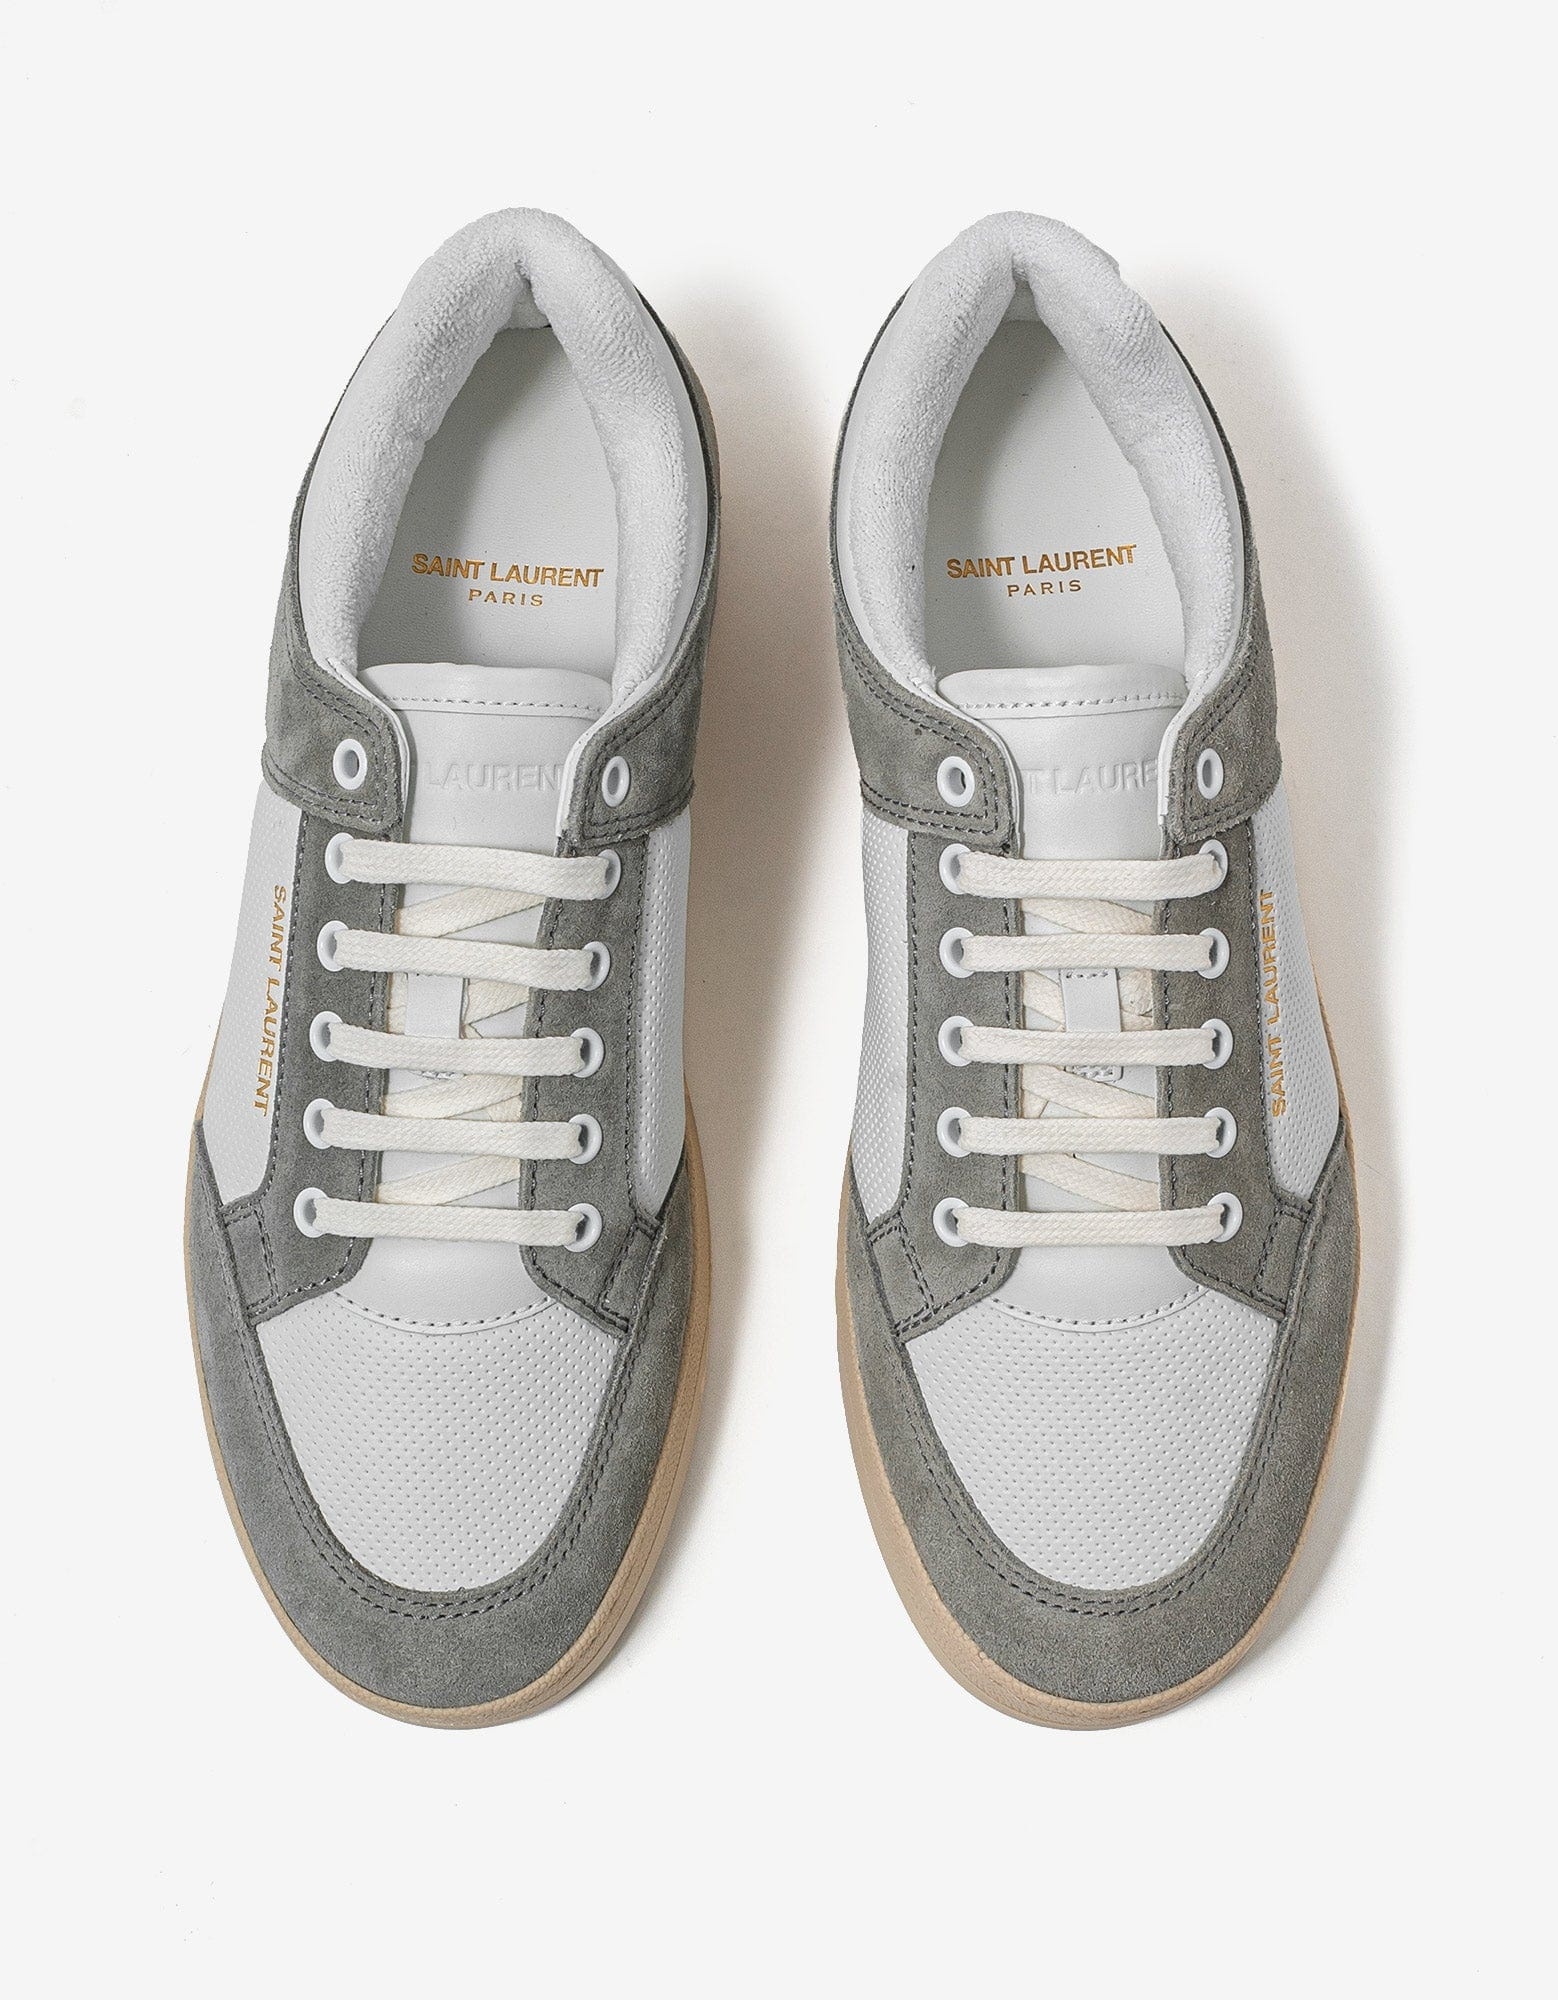 White & Grey SL/61 Leather Trainers - 5